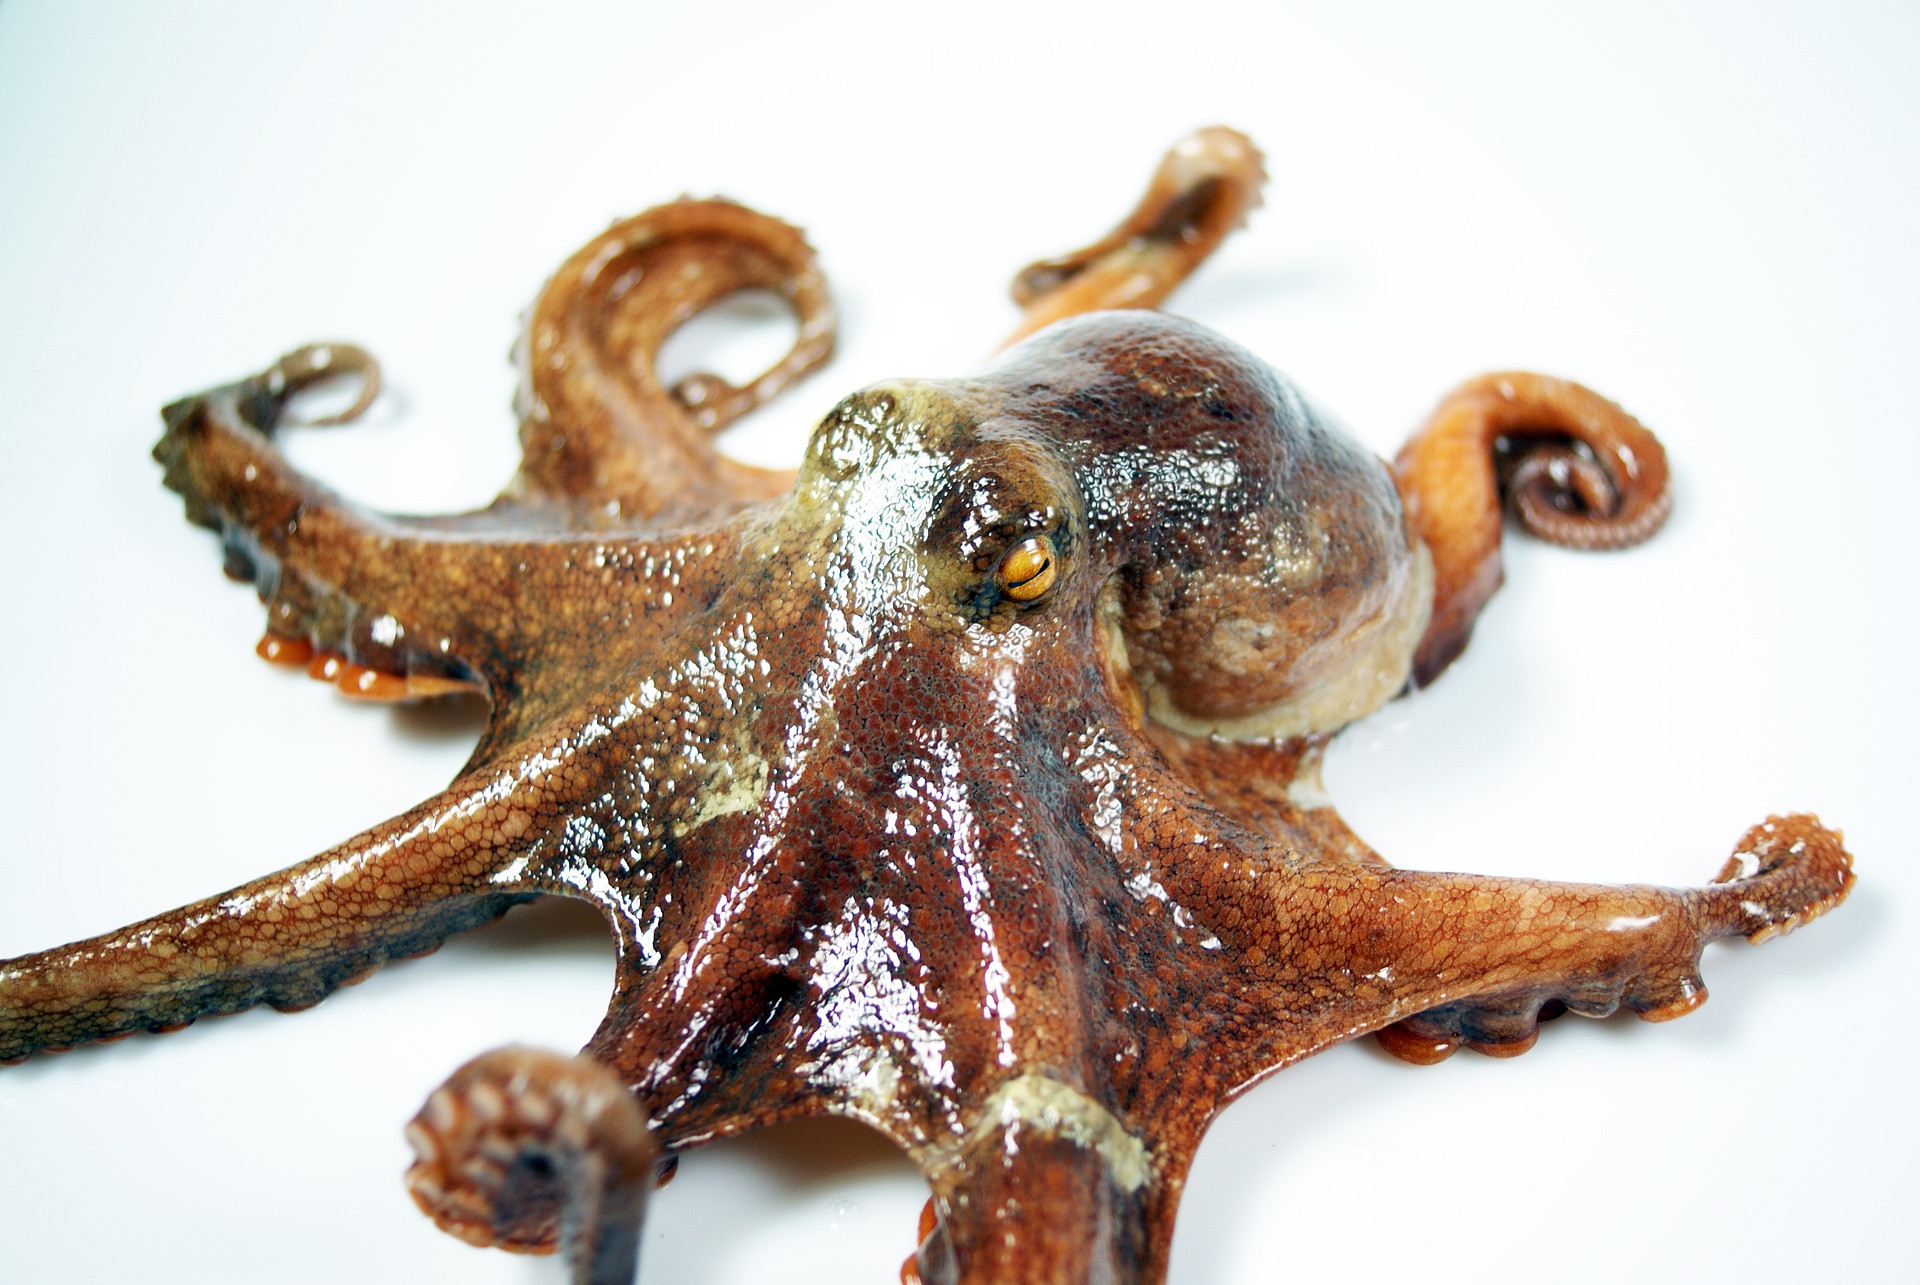 Octopuses have favourite arms